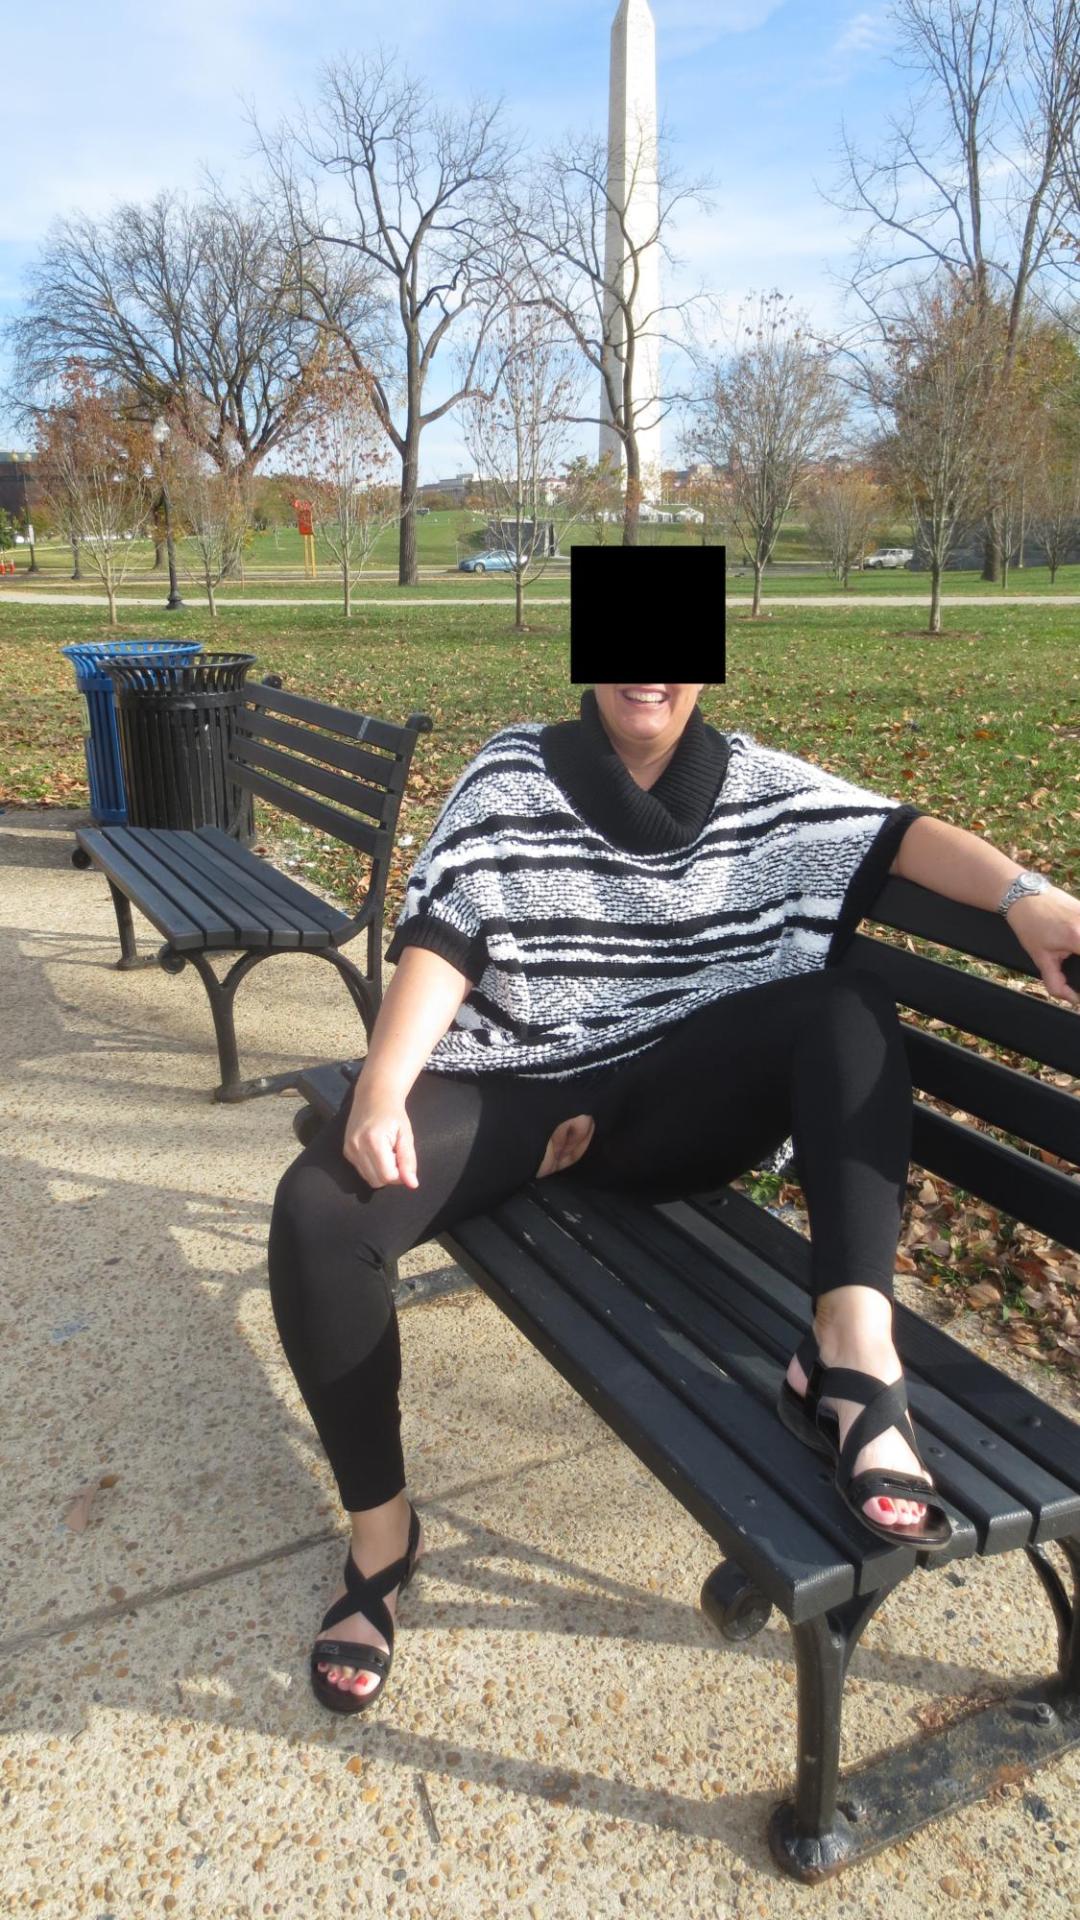 desertnude1:  One more from our trip to DC… Sorry about the big black box over